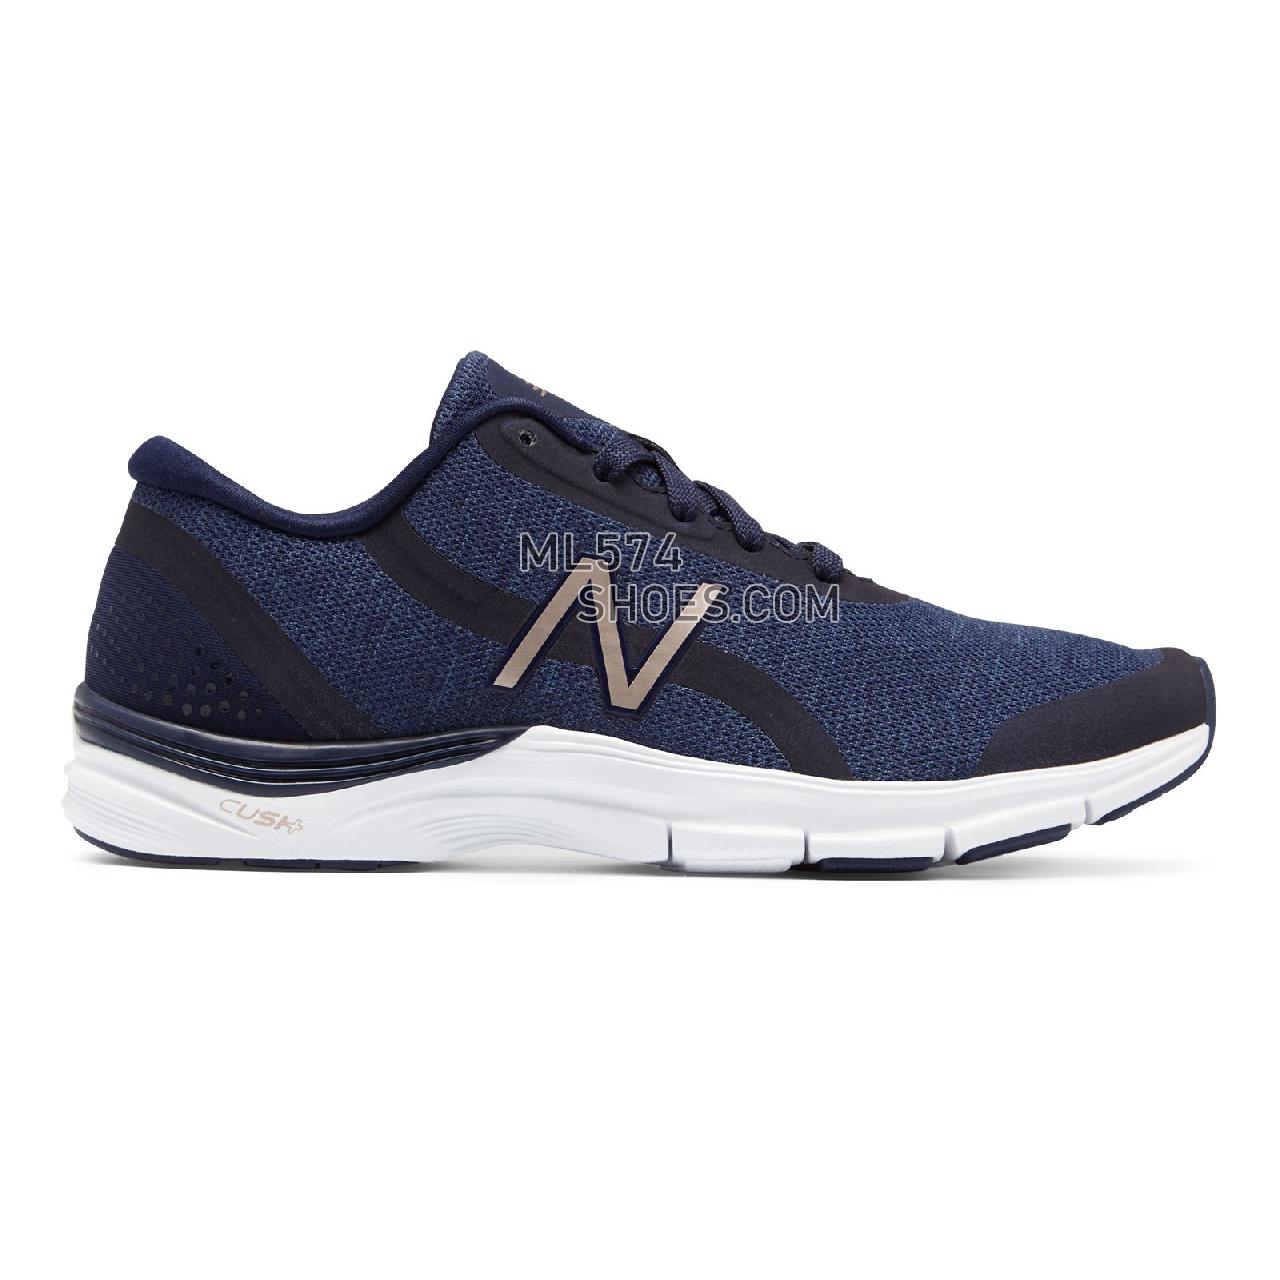 New Balance 711v3 Heathered Trainer - Women's 711 - X-training Pigment with Champagne - WX711NM3